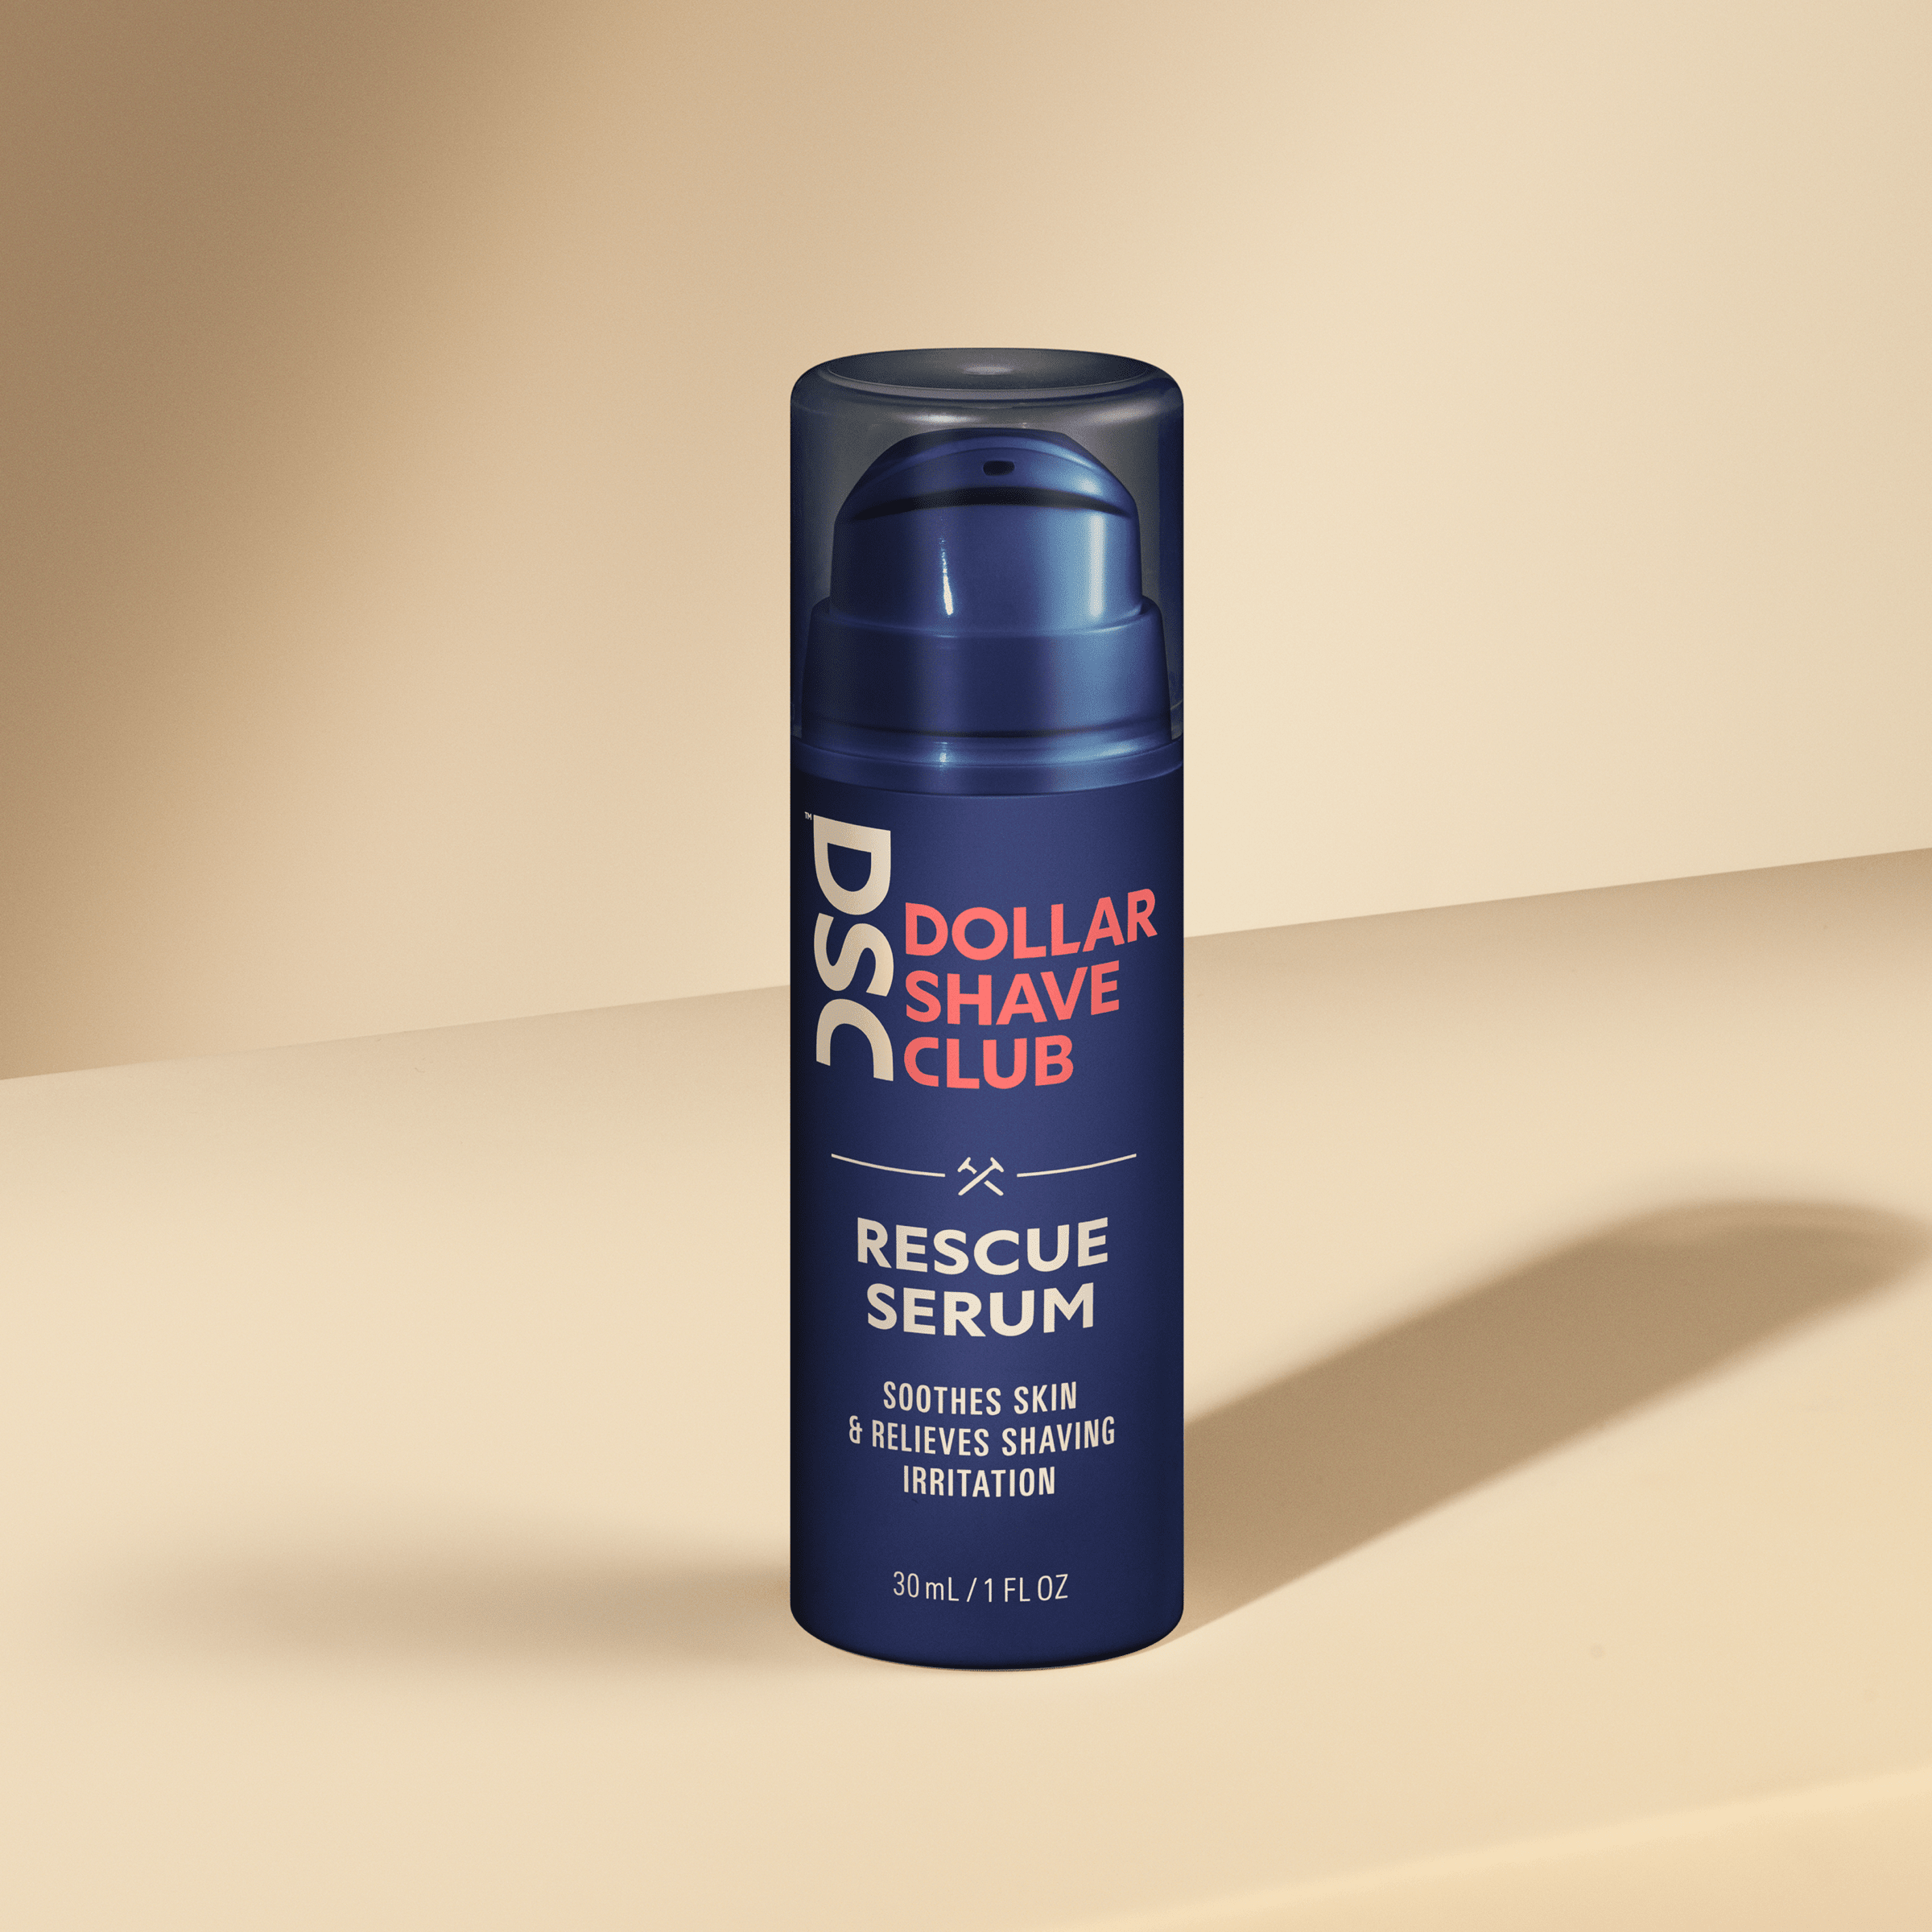 Dollar Shave Club Rescue Serum product image against tan backdrop.